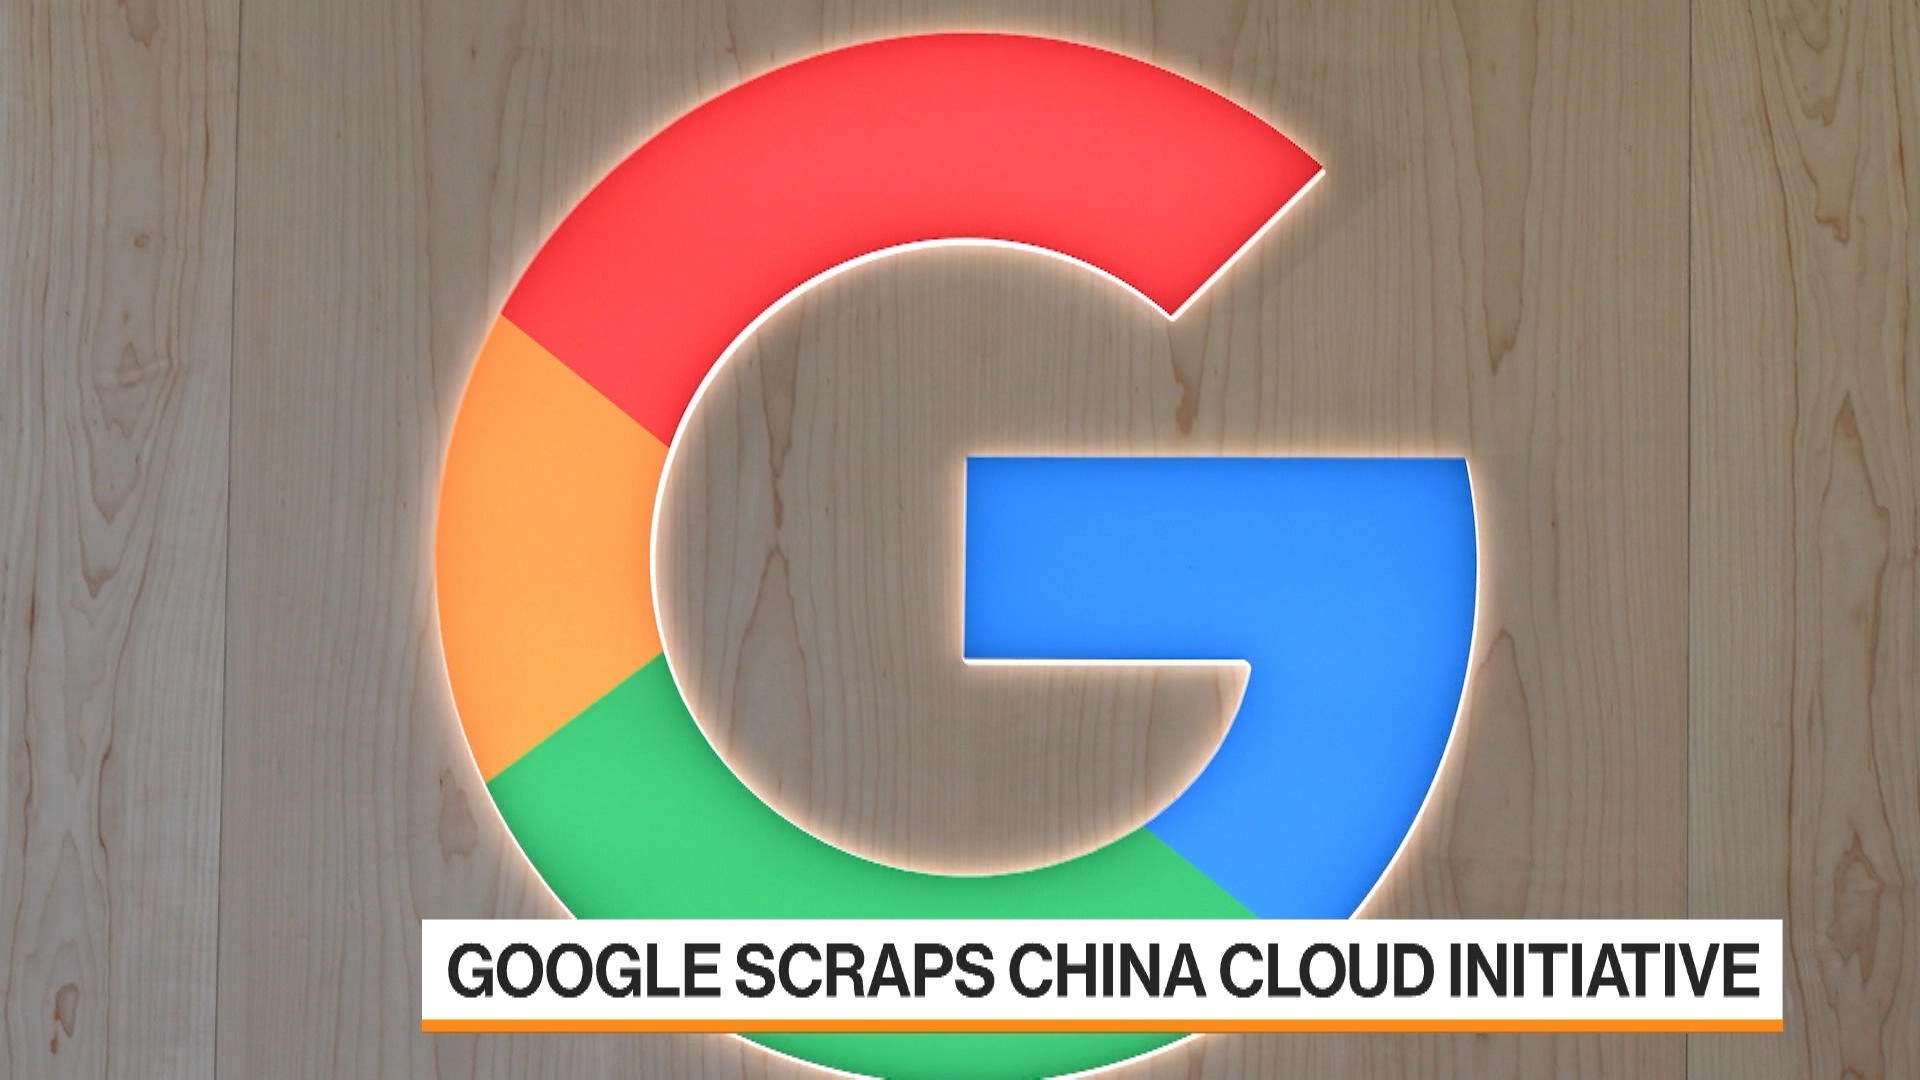 Google Scrapped Cloud Initiative in China, Other Markets